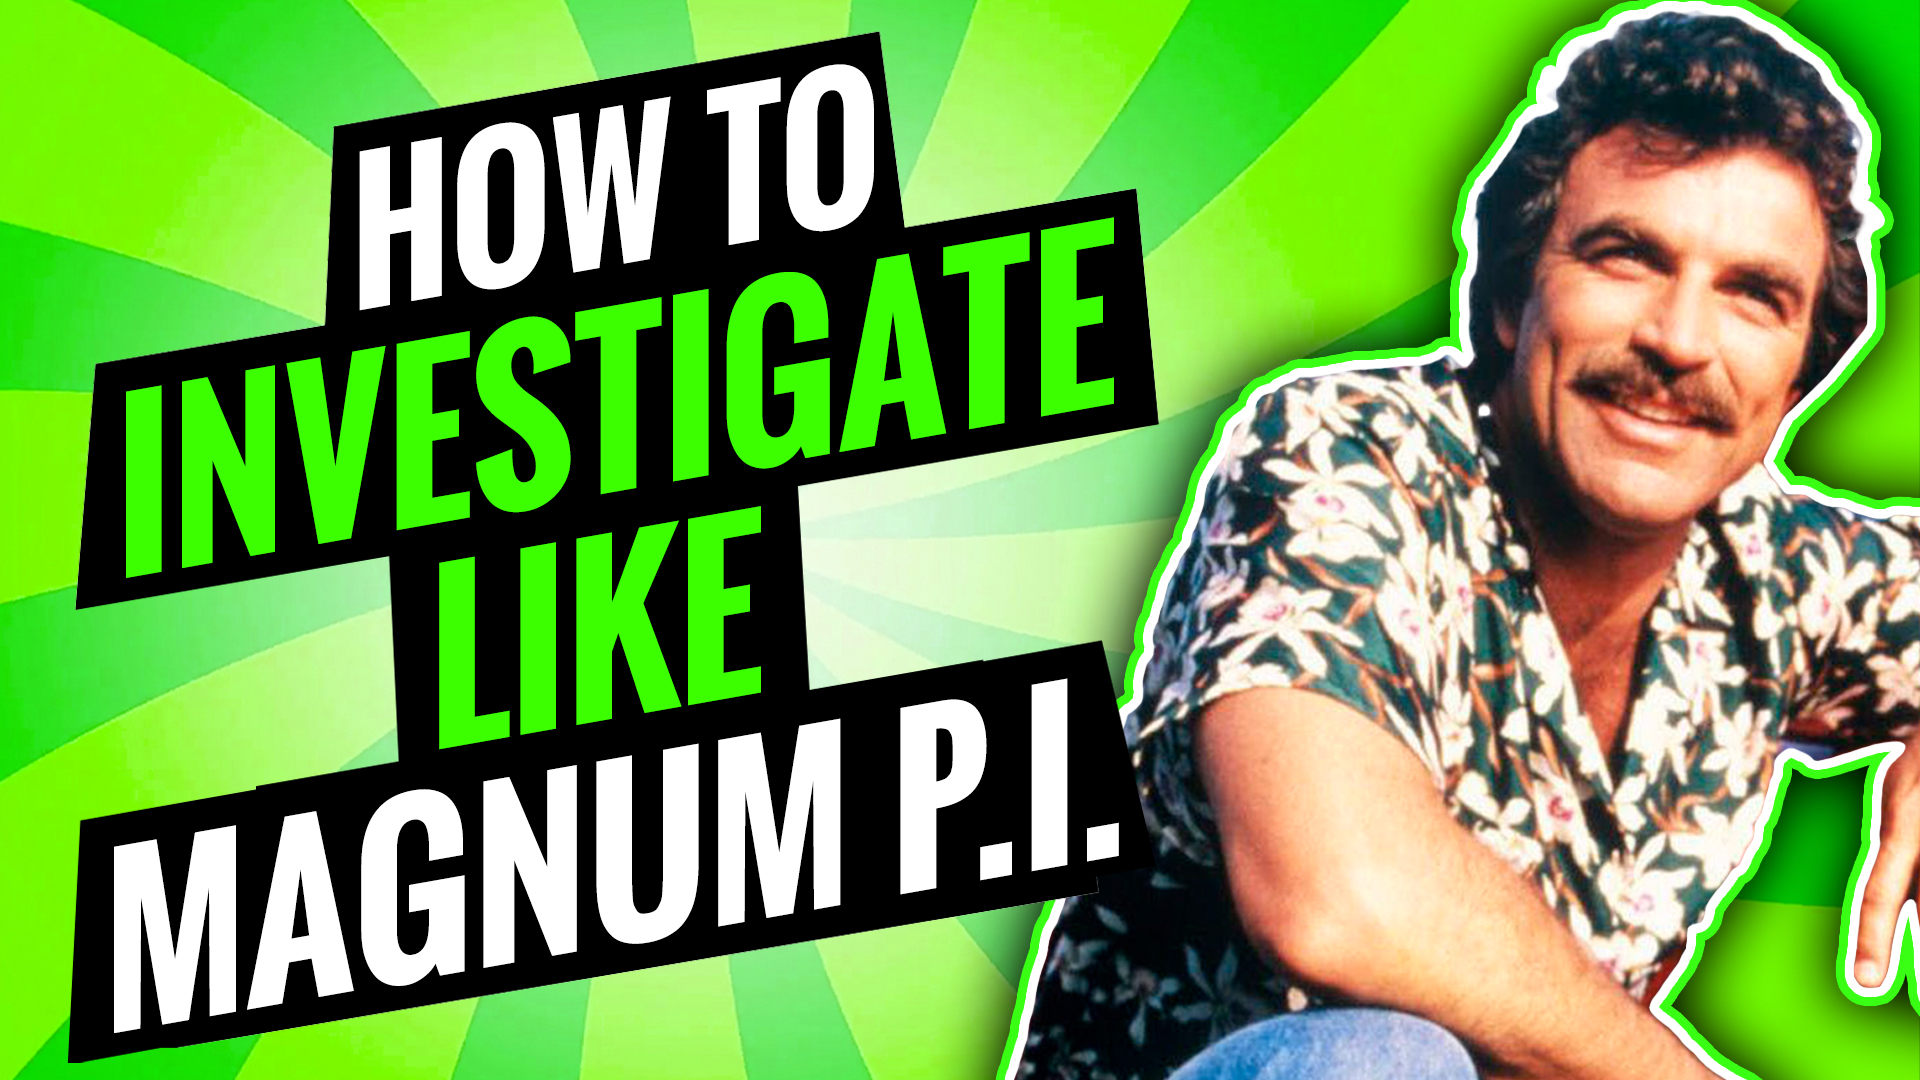 How to Investigate Like Magnum PI [VIDEO]